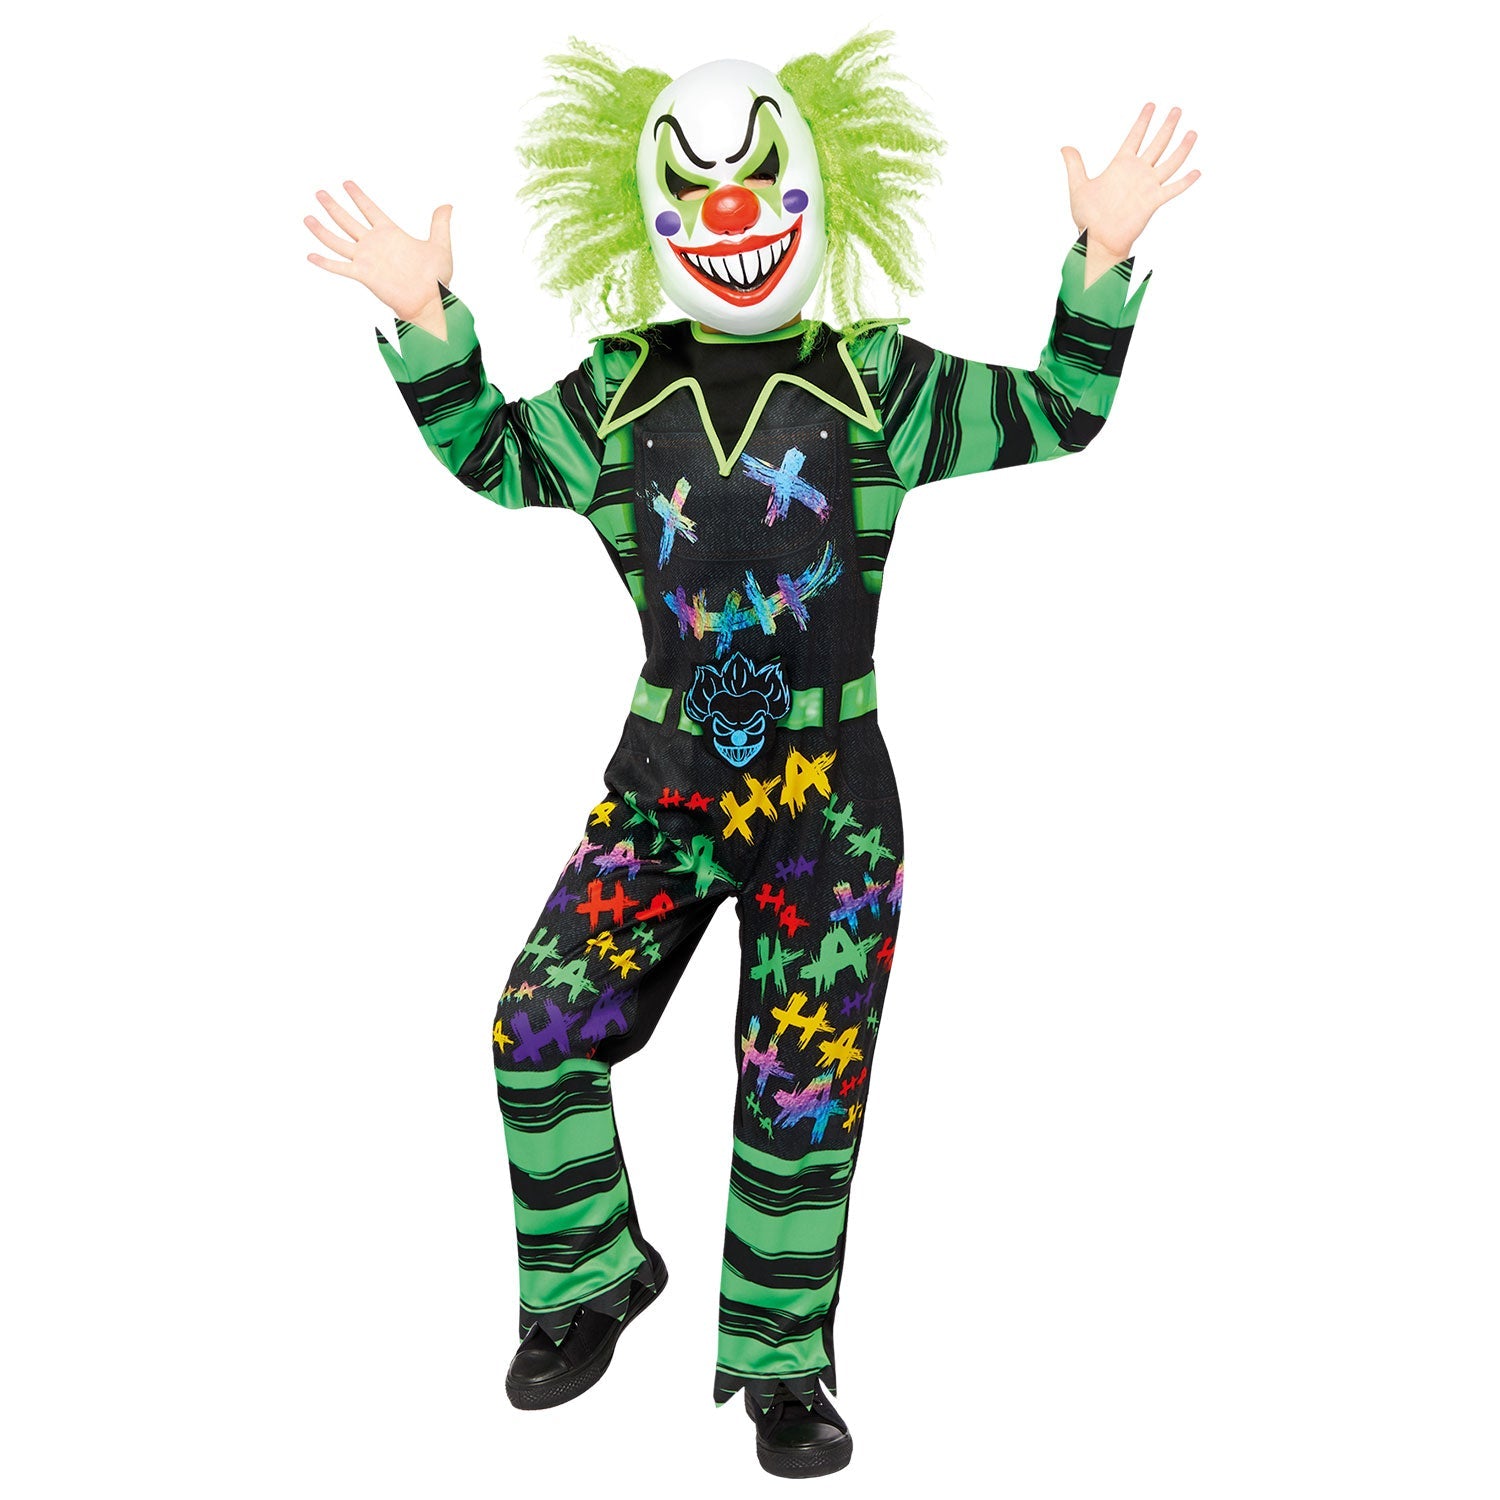 HaHa Clown Costume includes, jumpsuit and mask